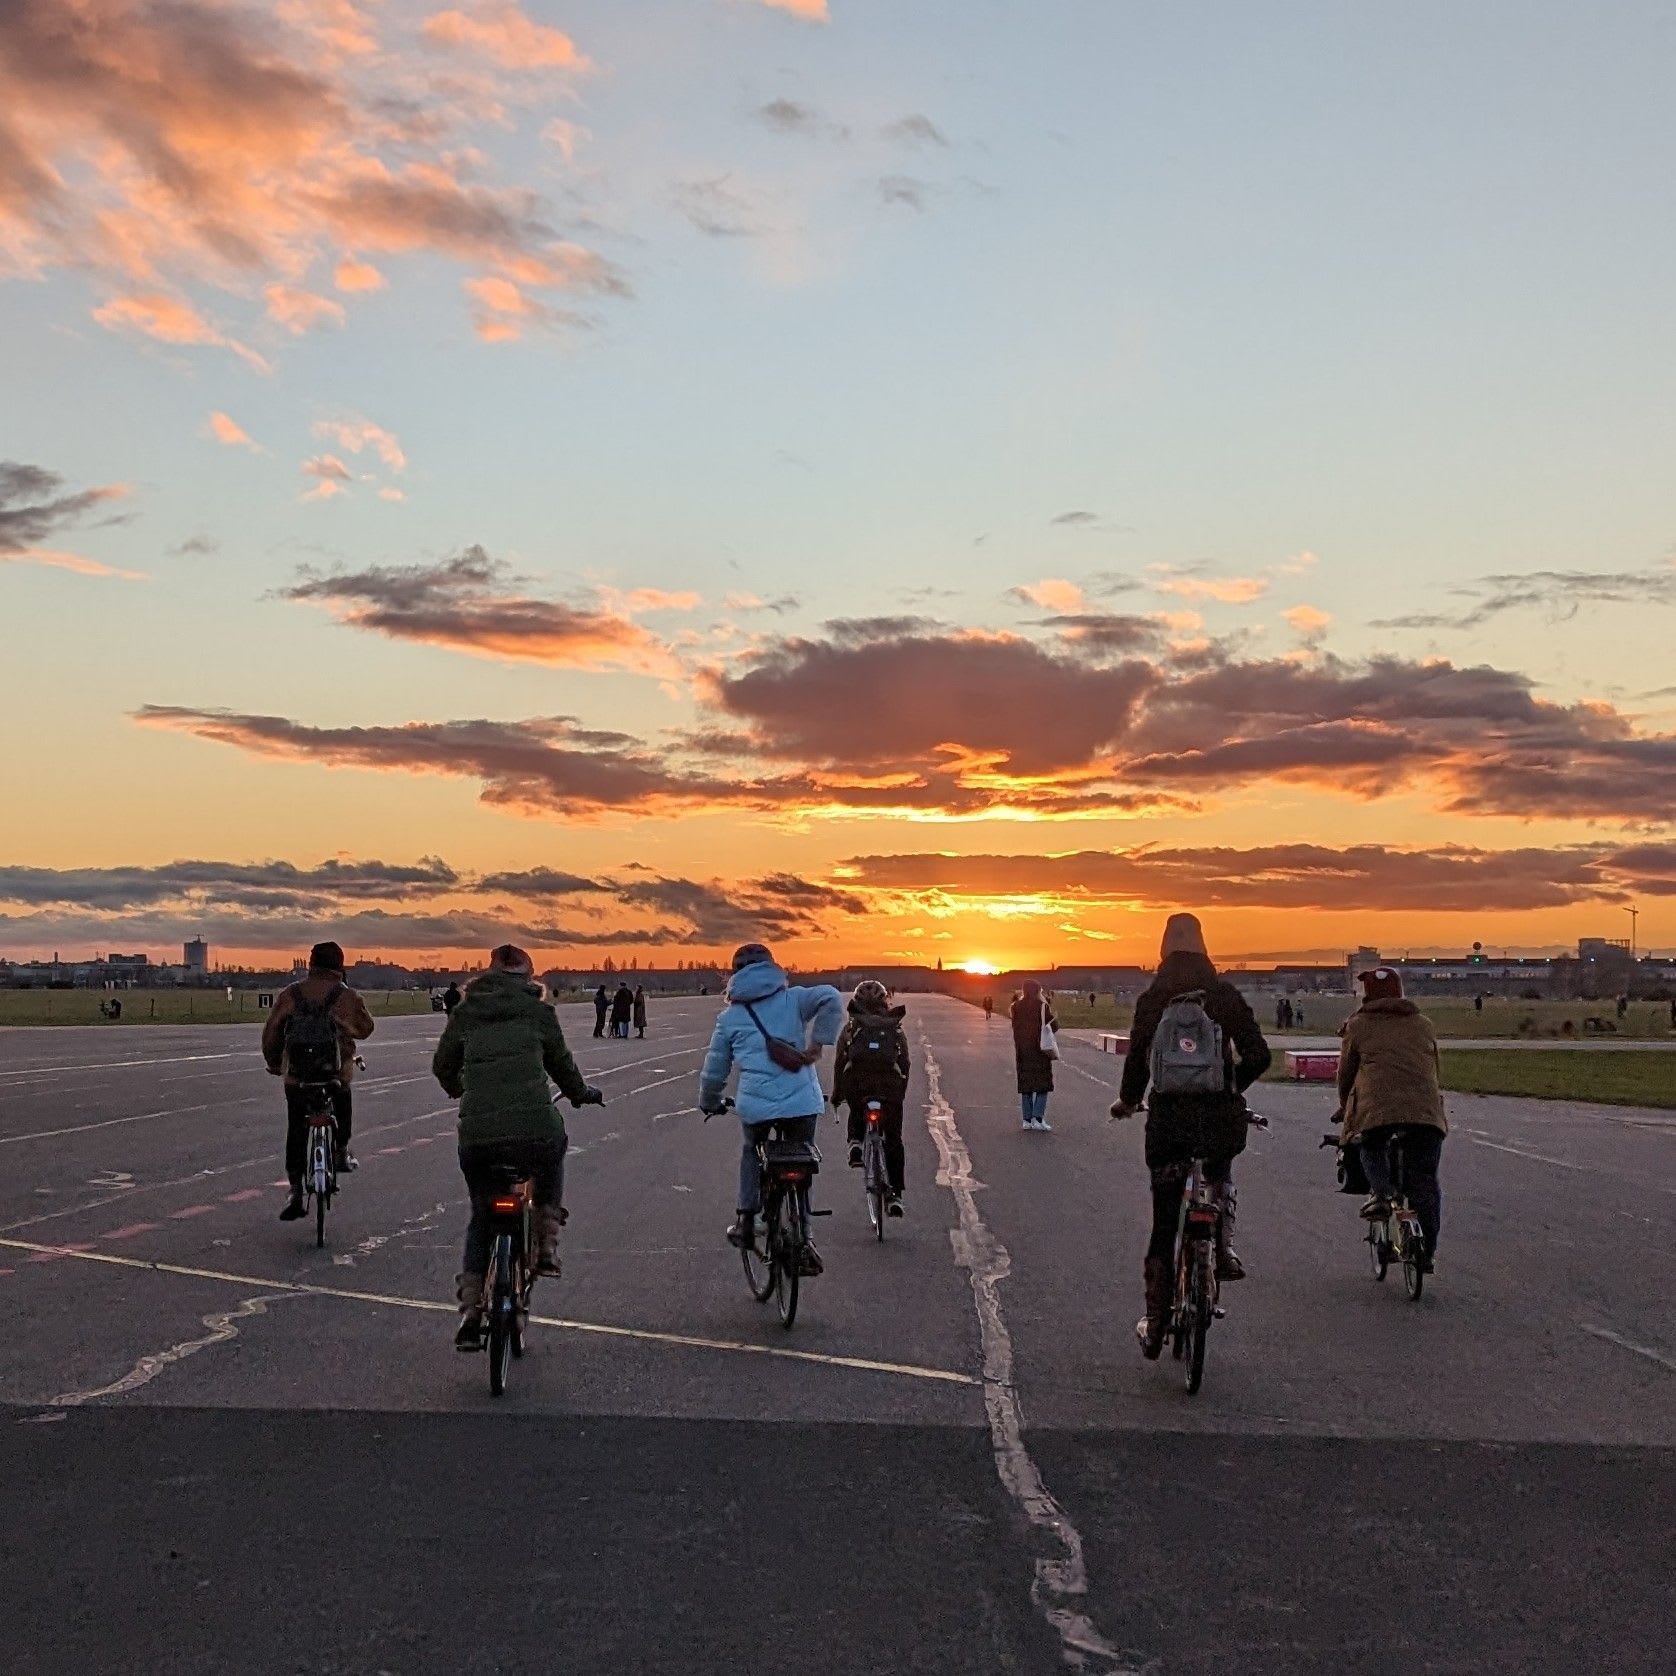 6 people riding into the sunset on a wide tarmac.